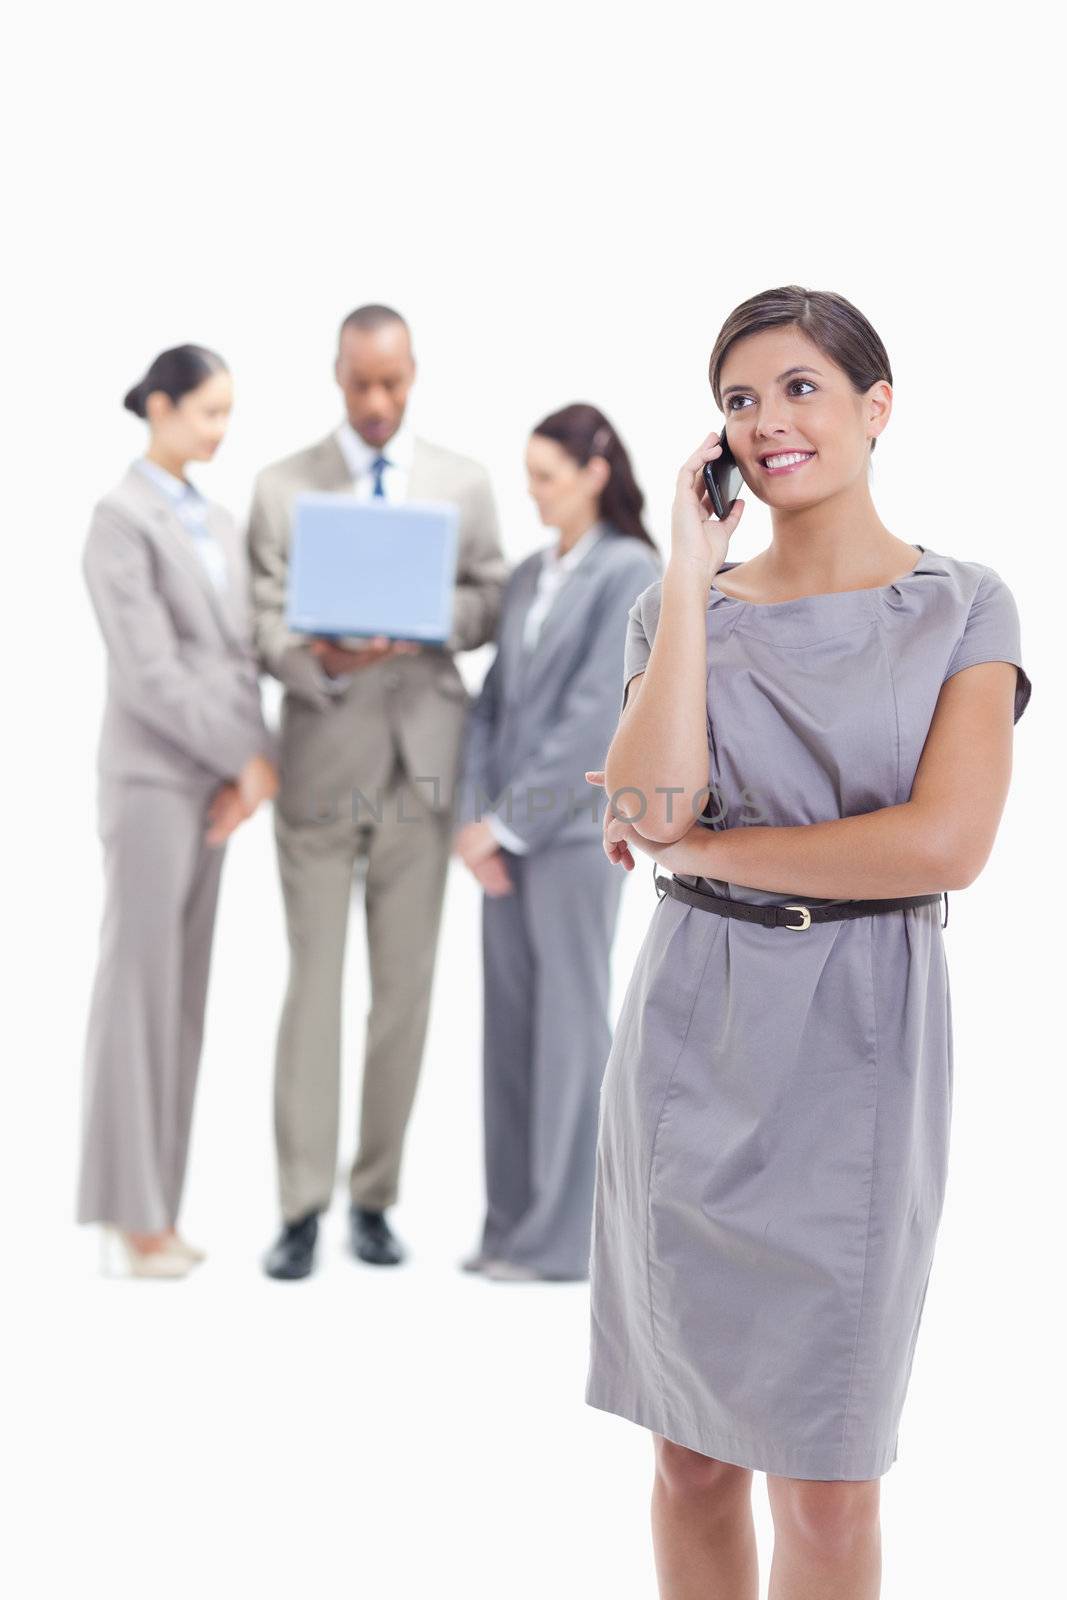 Businesswoman looking up on the phone with co-workers in the background watching a laptop screen